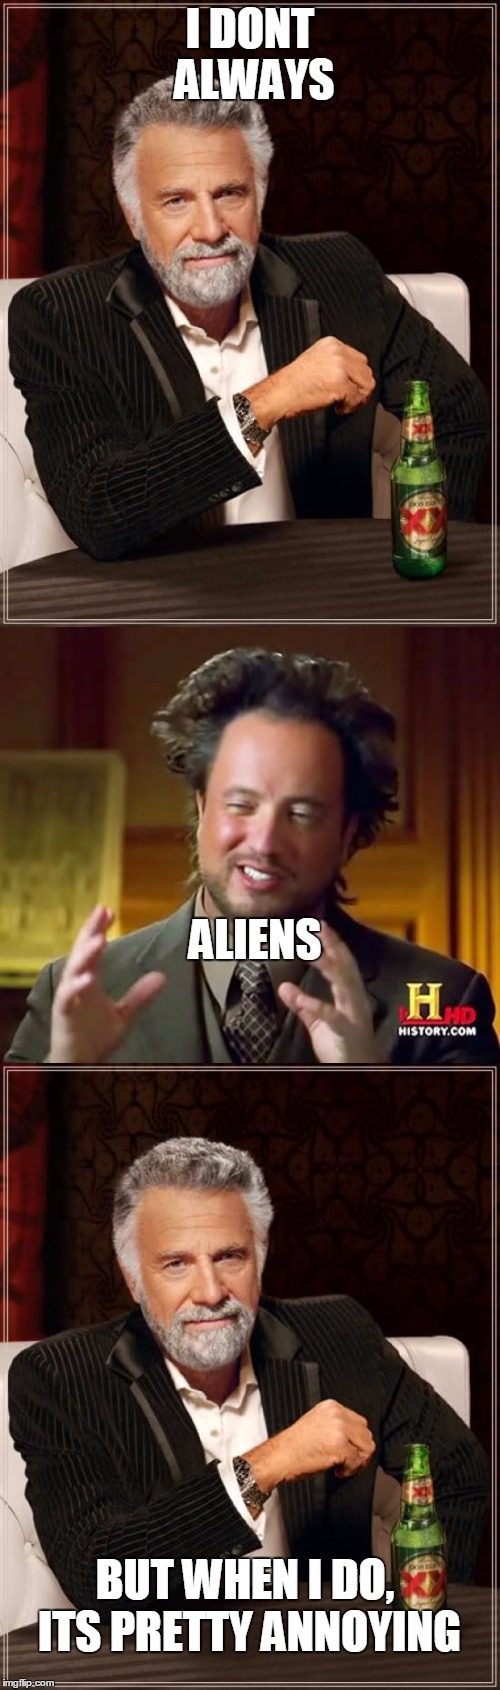 the ancient aliens dude always be interrupting | I DONT ALWAYS; ALIENS; BUT WHEN I DO, ITS PRETTY ANNOYING | image tagged in ancient aliens dude | made w/ Imgflip meme maker